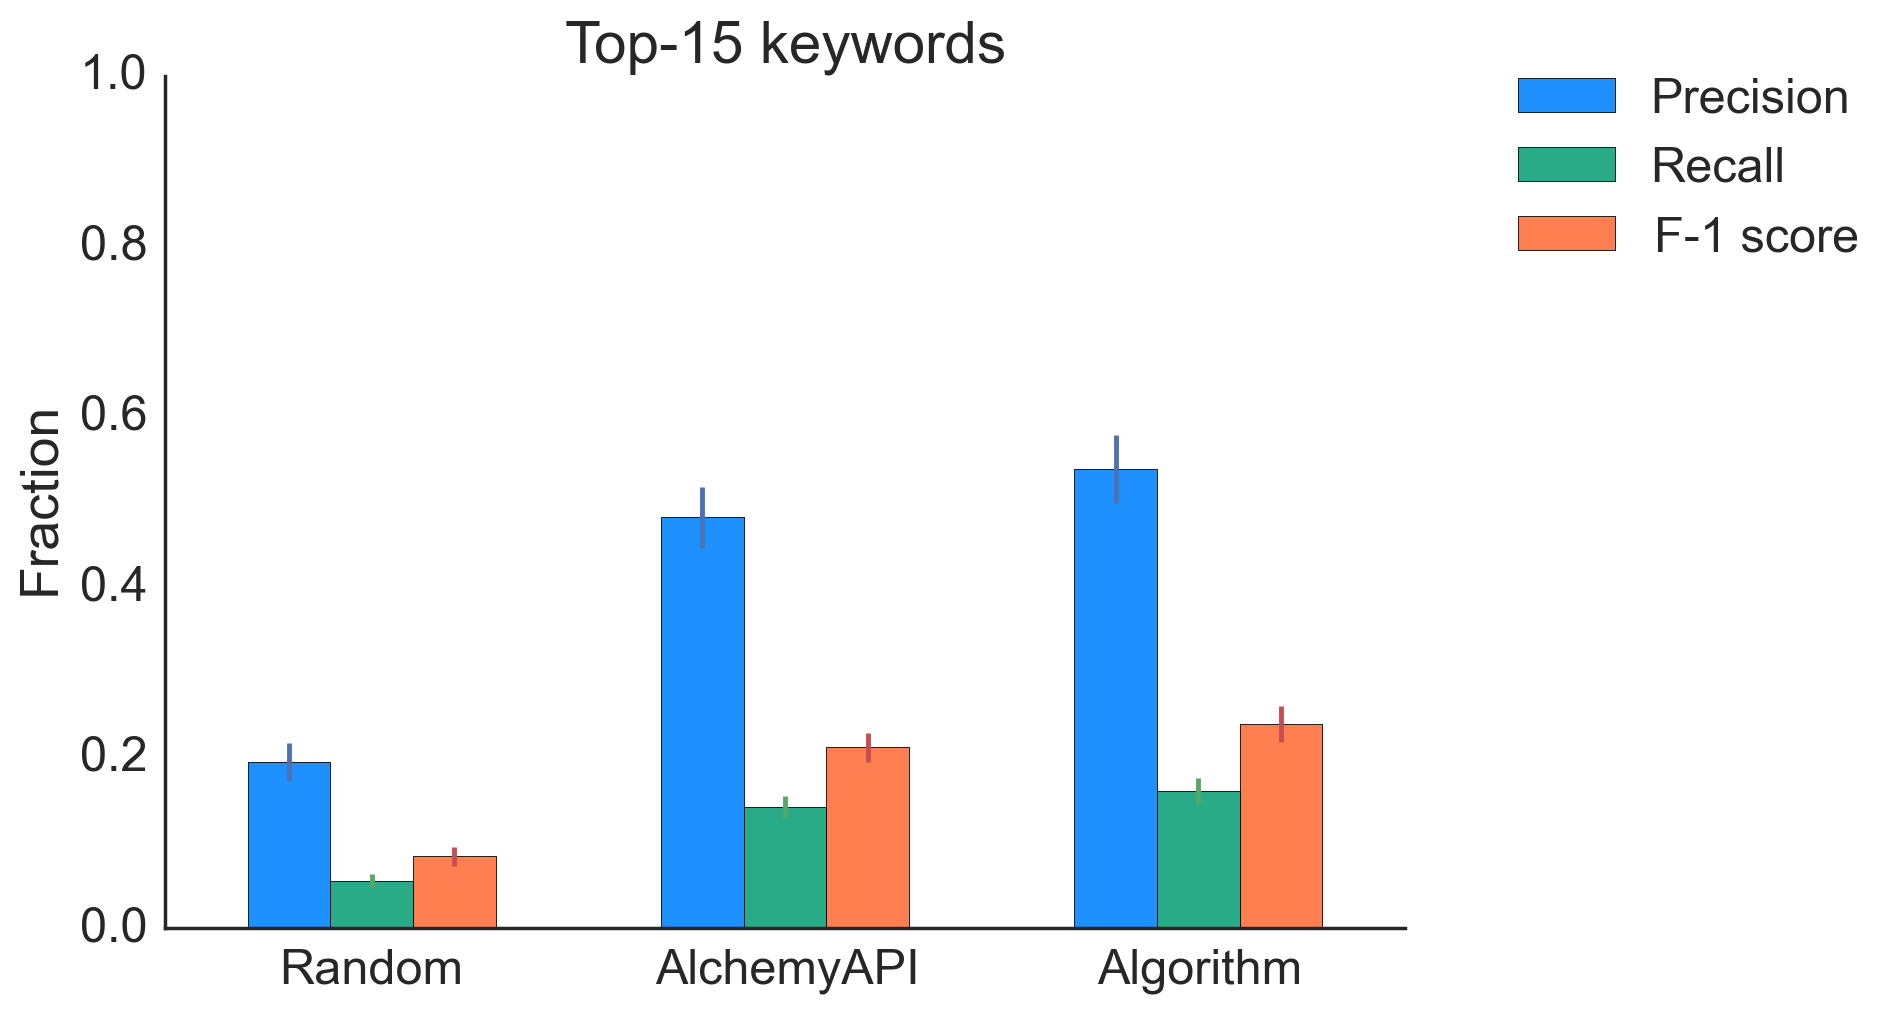 Top-15 keyword extraction results